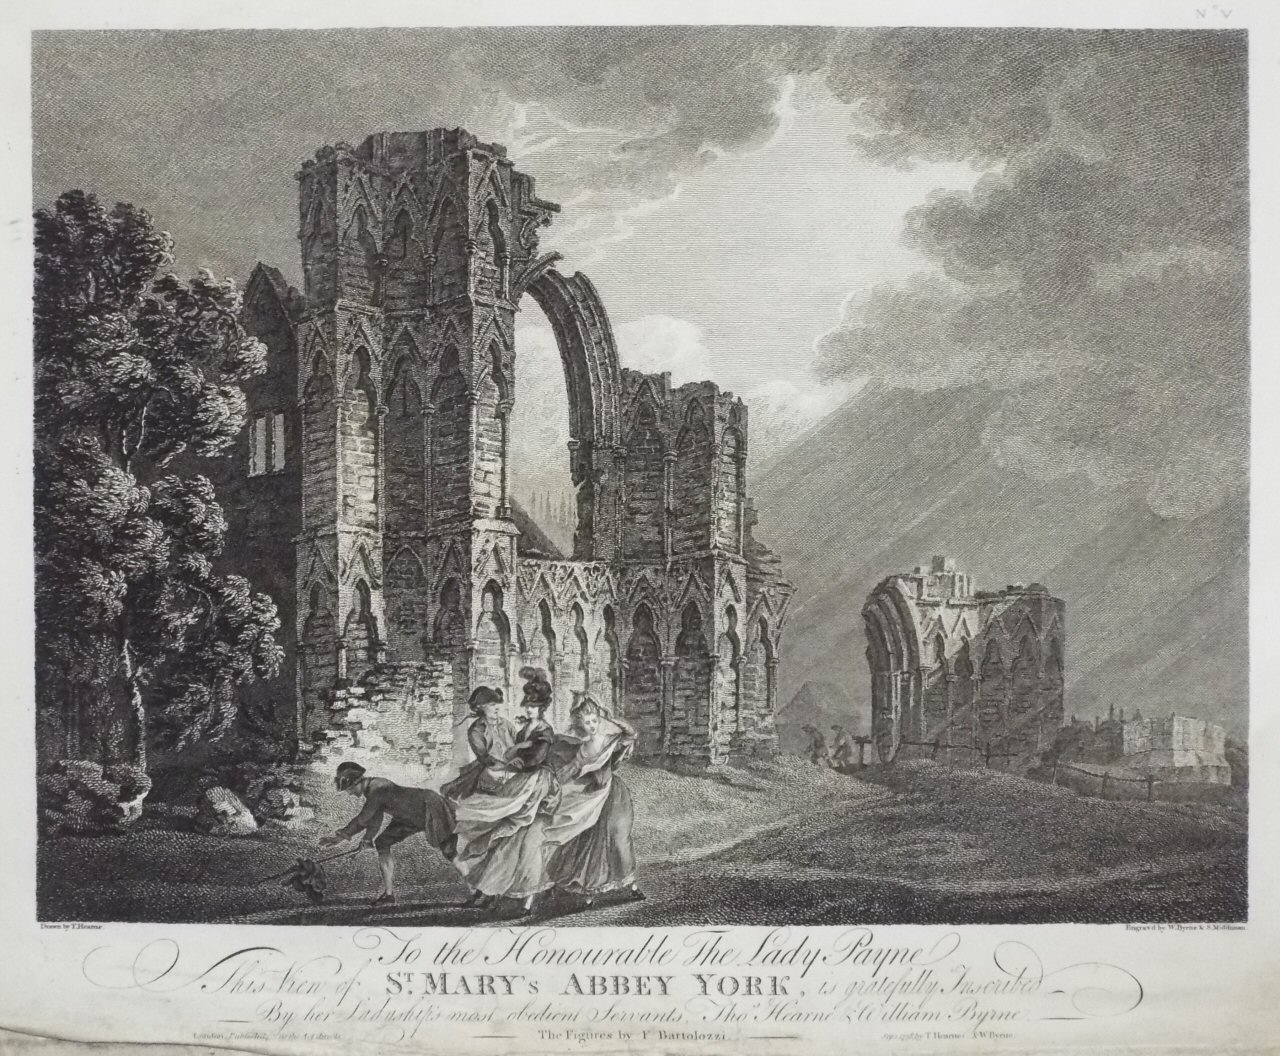 Print - To the Honourable The Lady Payne, his View of  St. Marys Abbey, York is graefully Inscribed... - Byrne